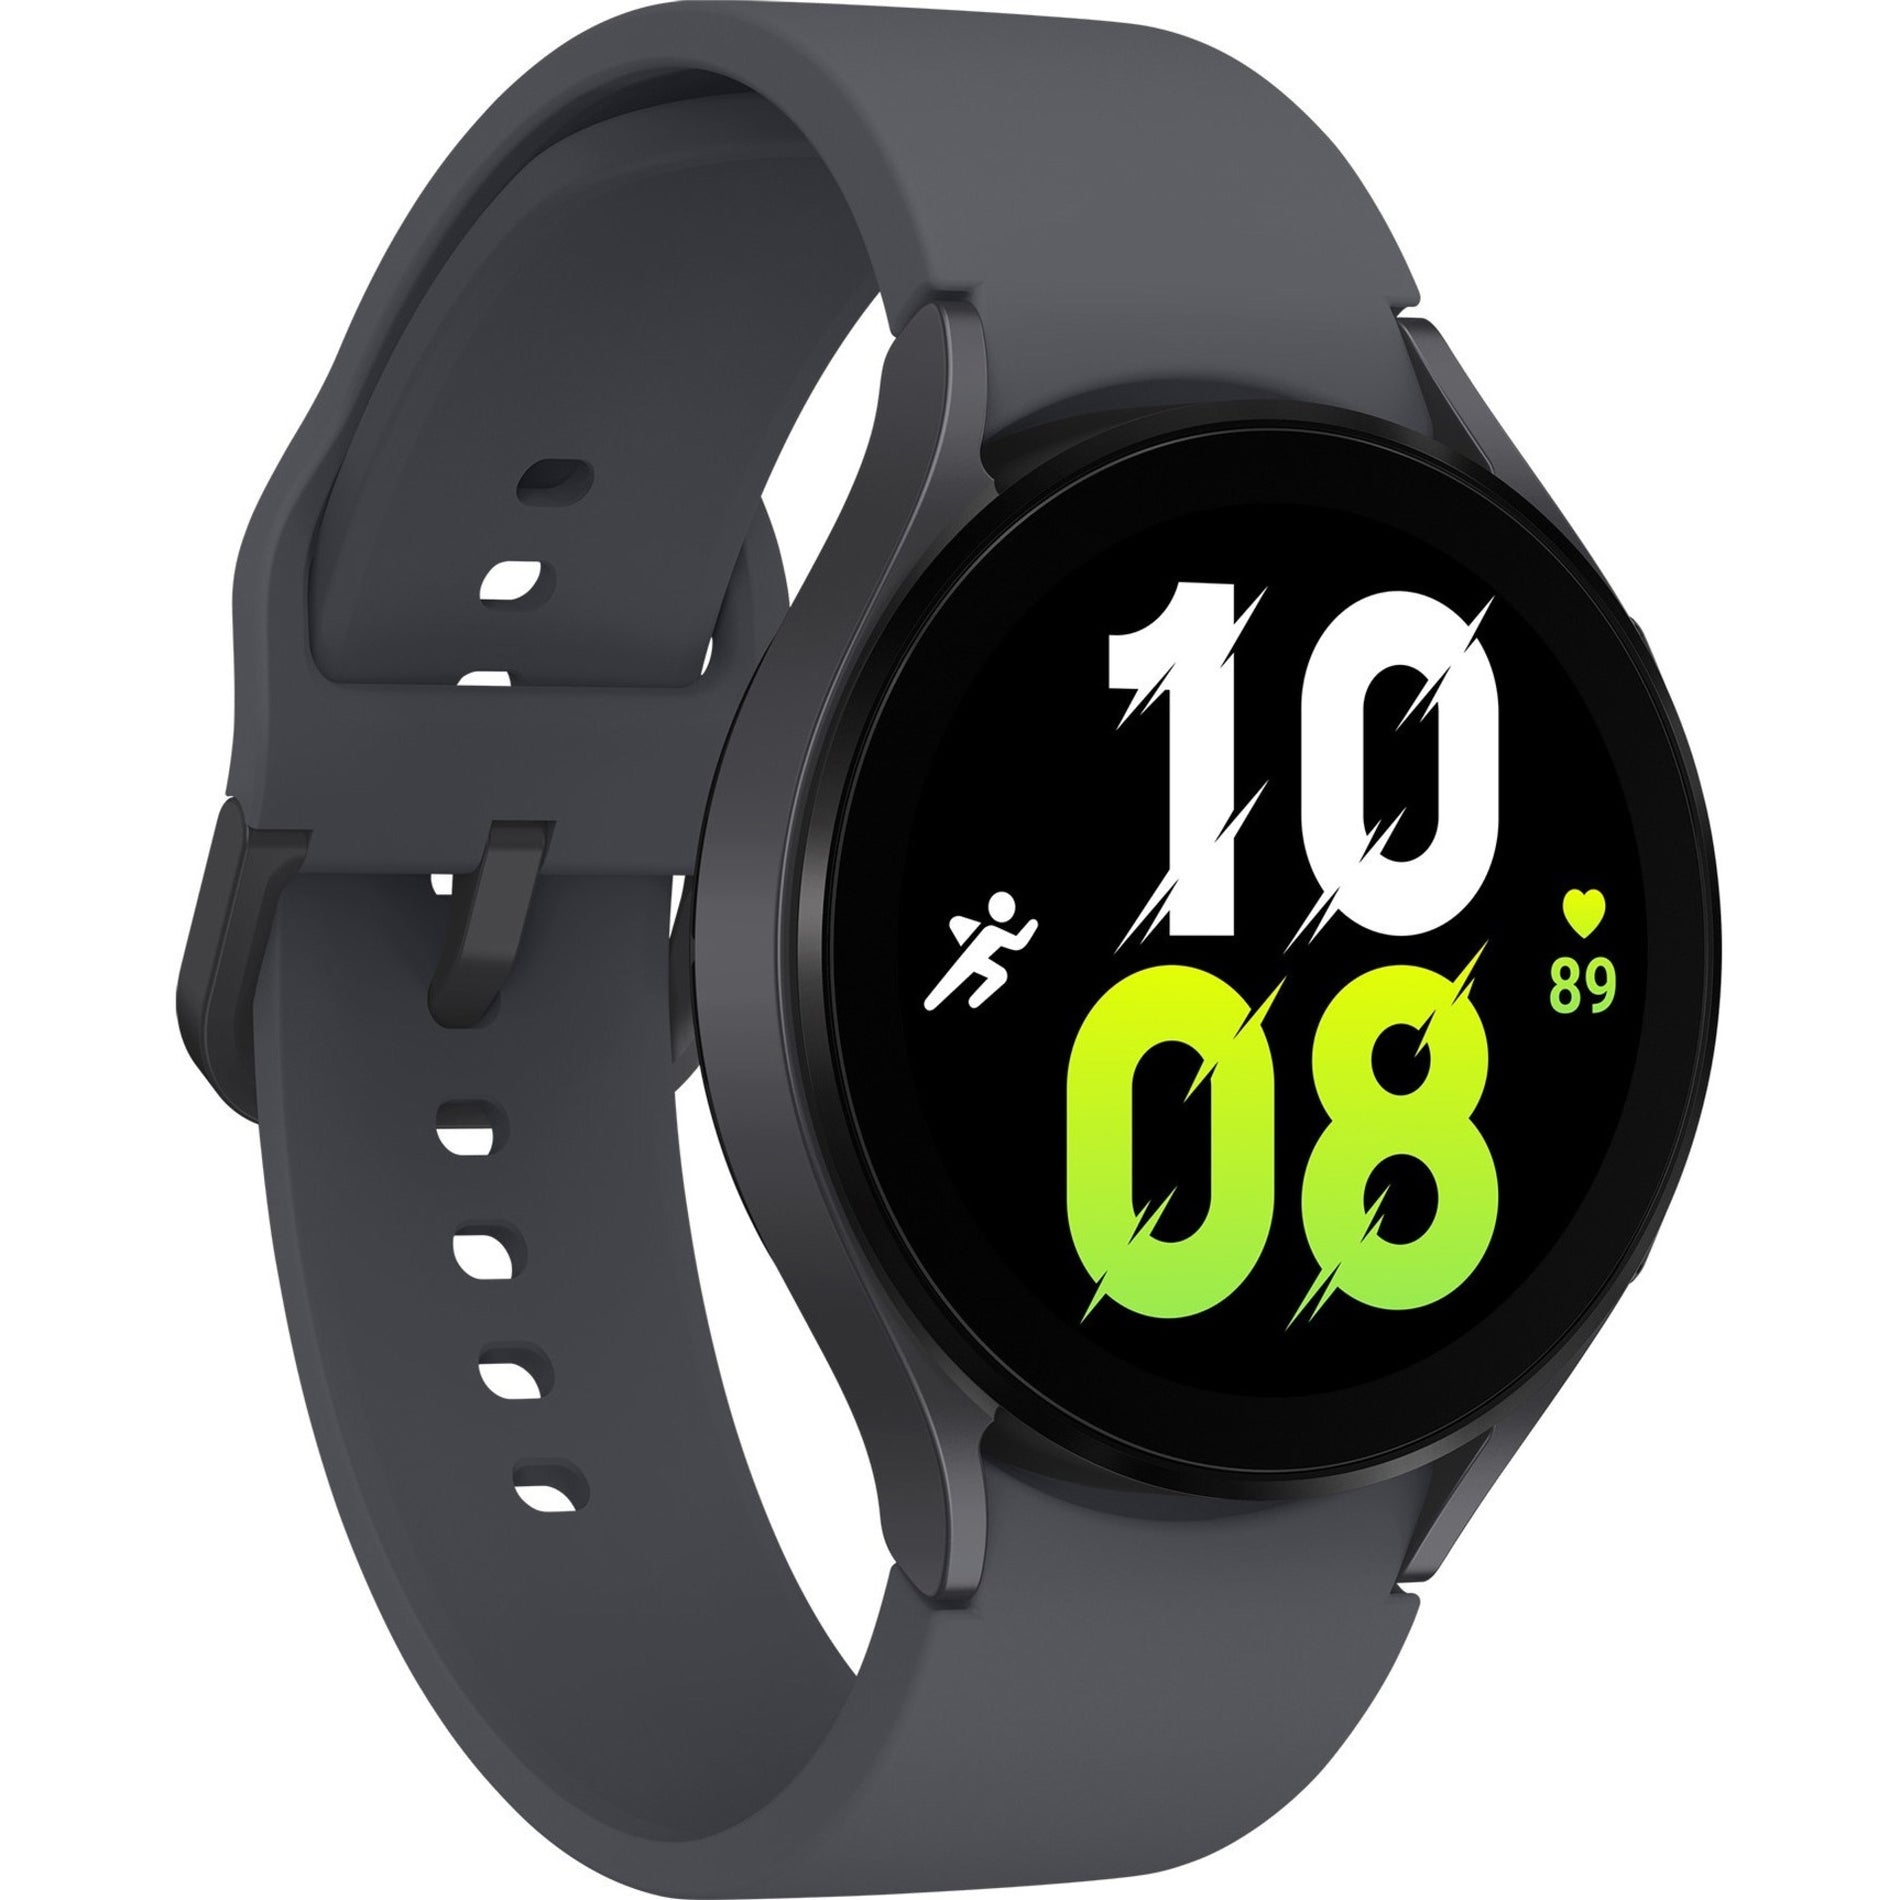 Samsung Galaxy Watch5 - Smart Watch for Swimming, Running, and Health & Fitness [Discontinued]